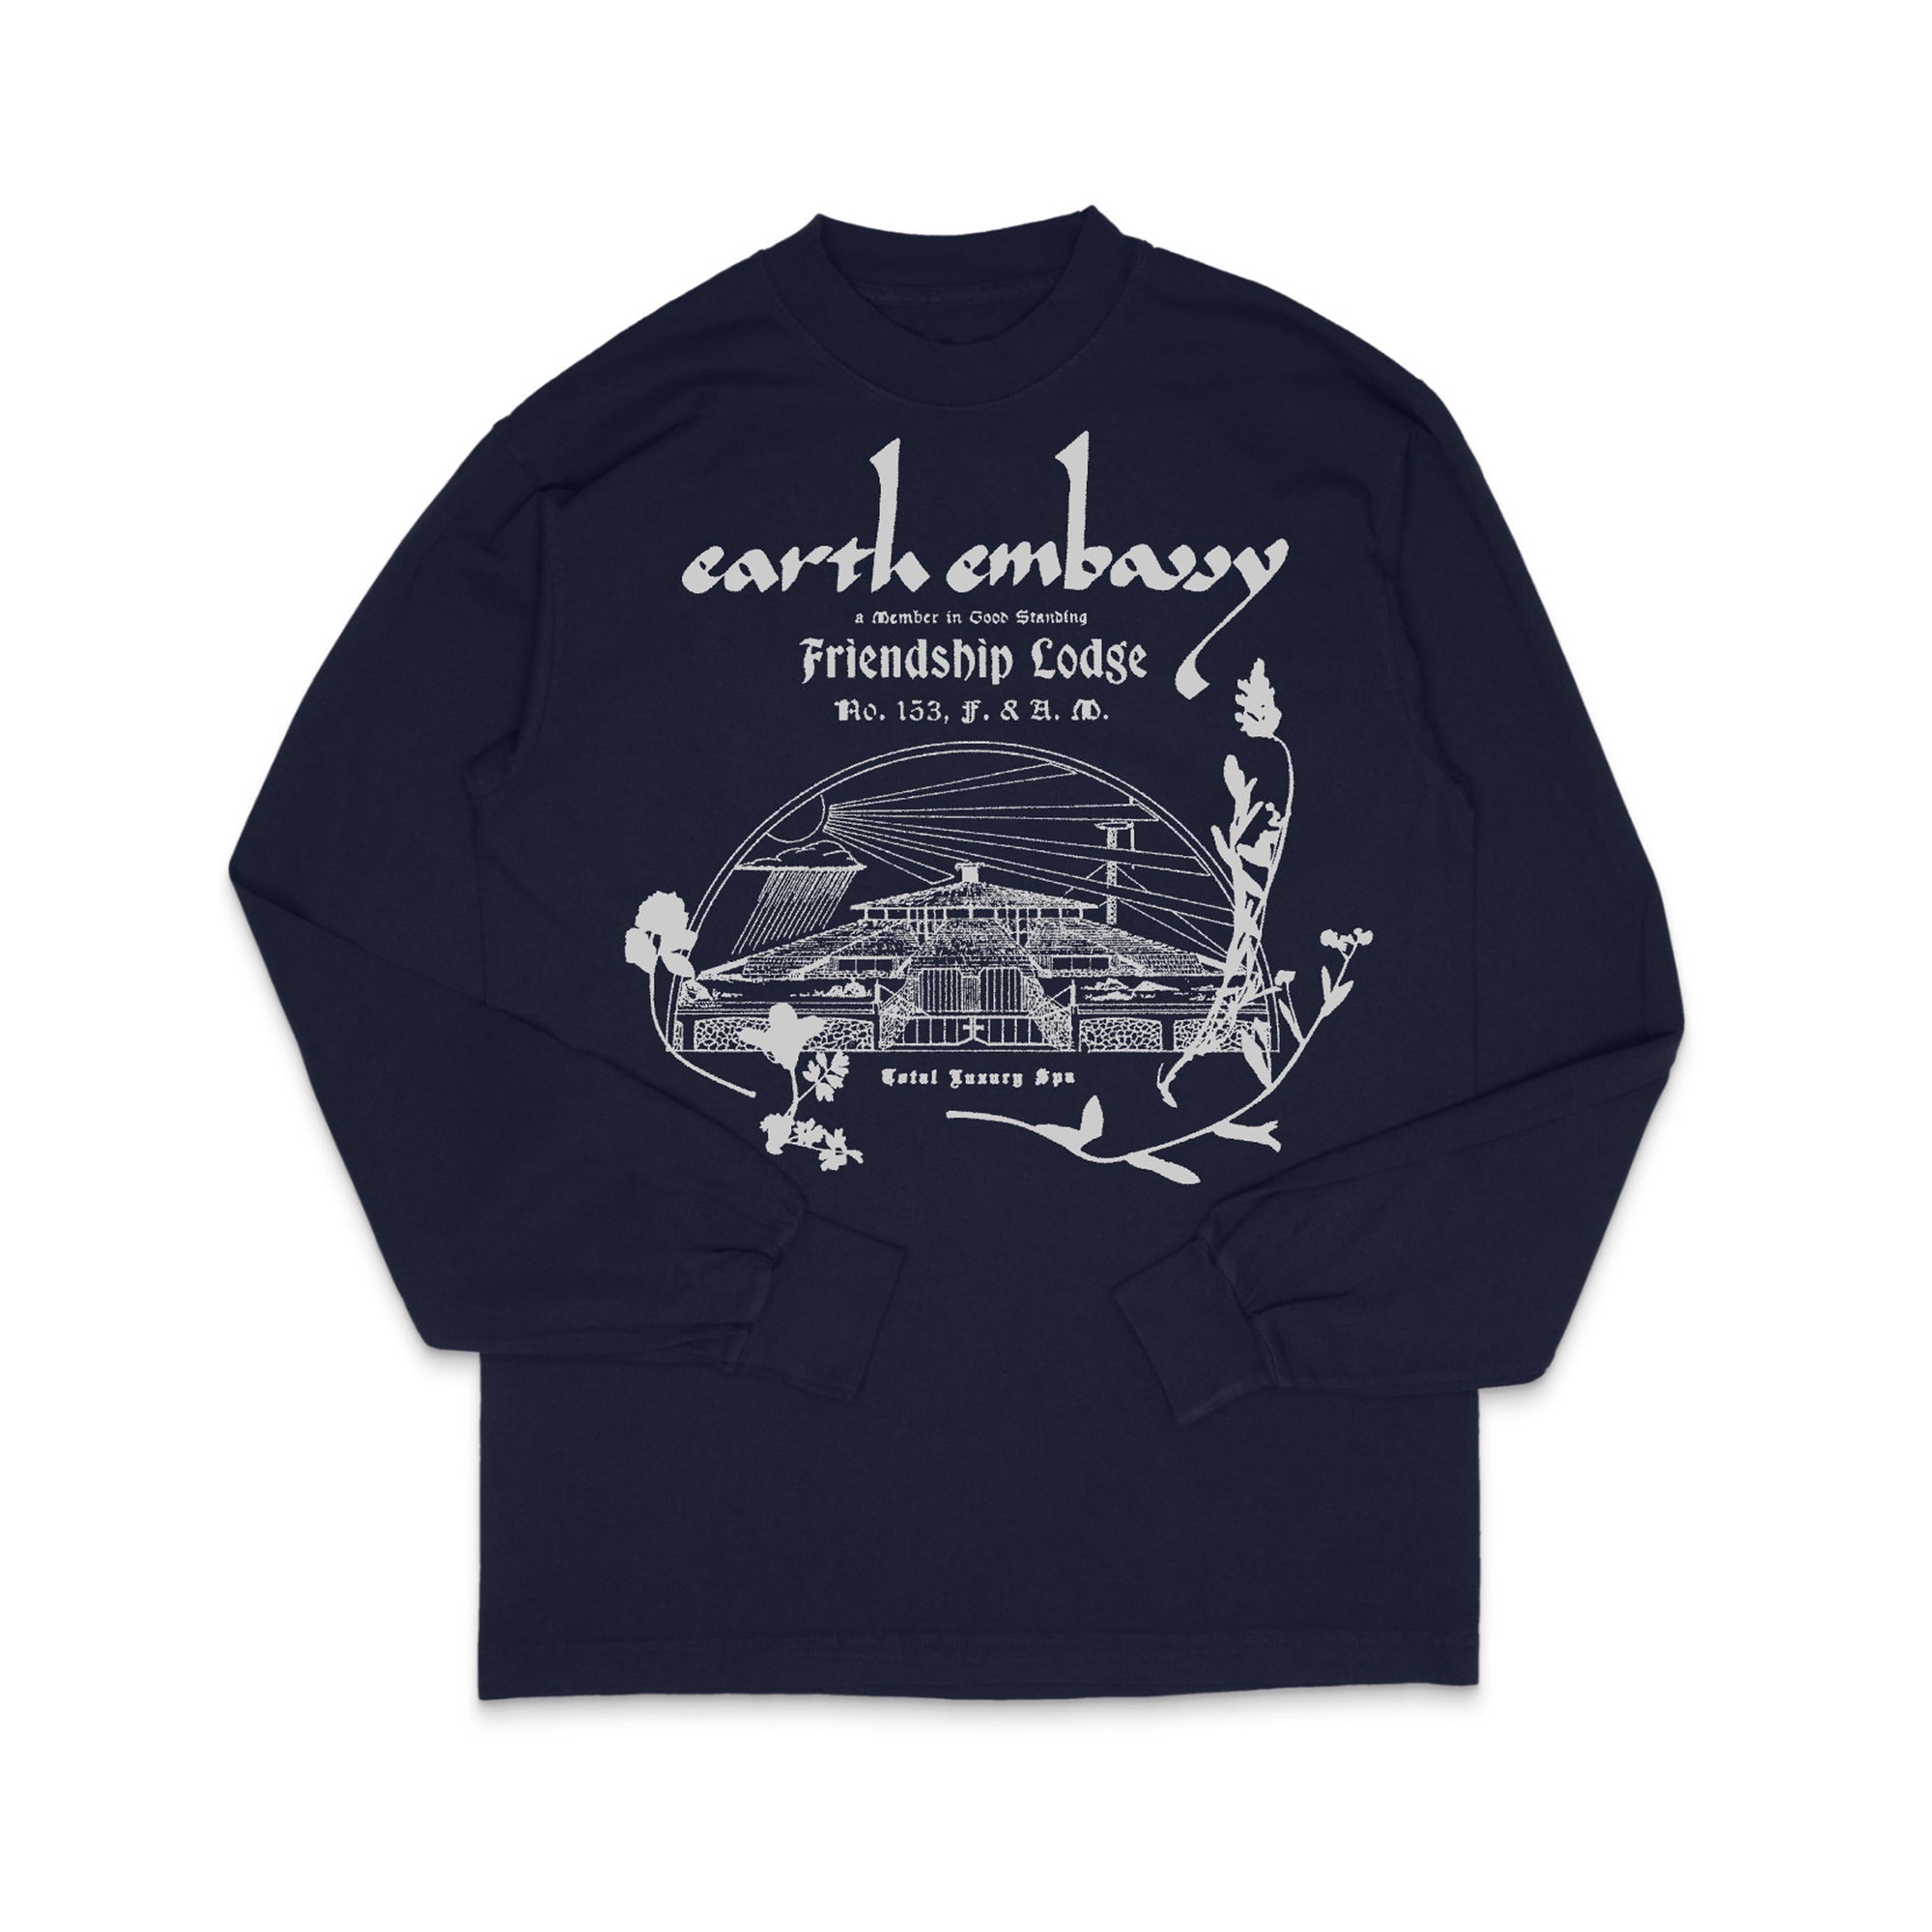 Total Luxury Spa - Men's Earth Embassy T-Shirt - (Navy) view 1